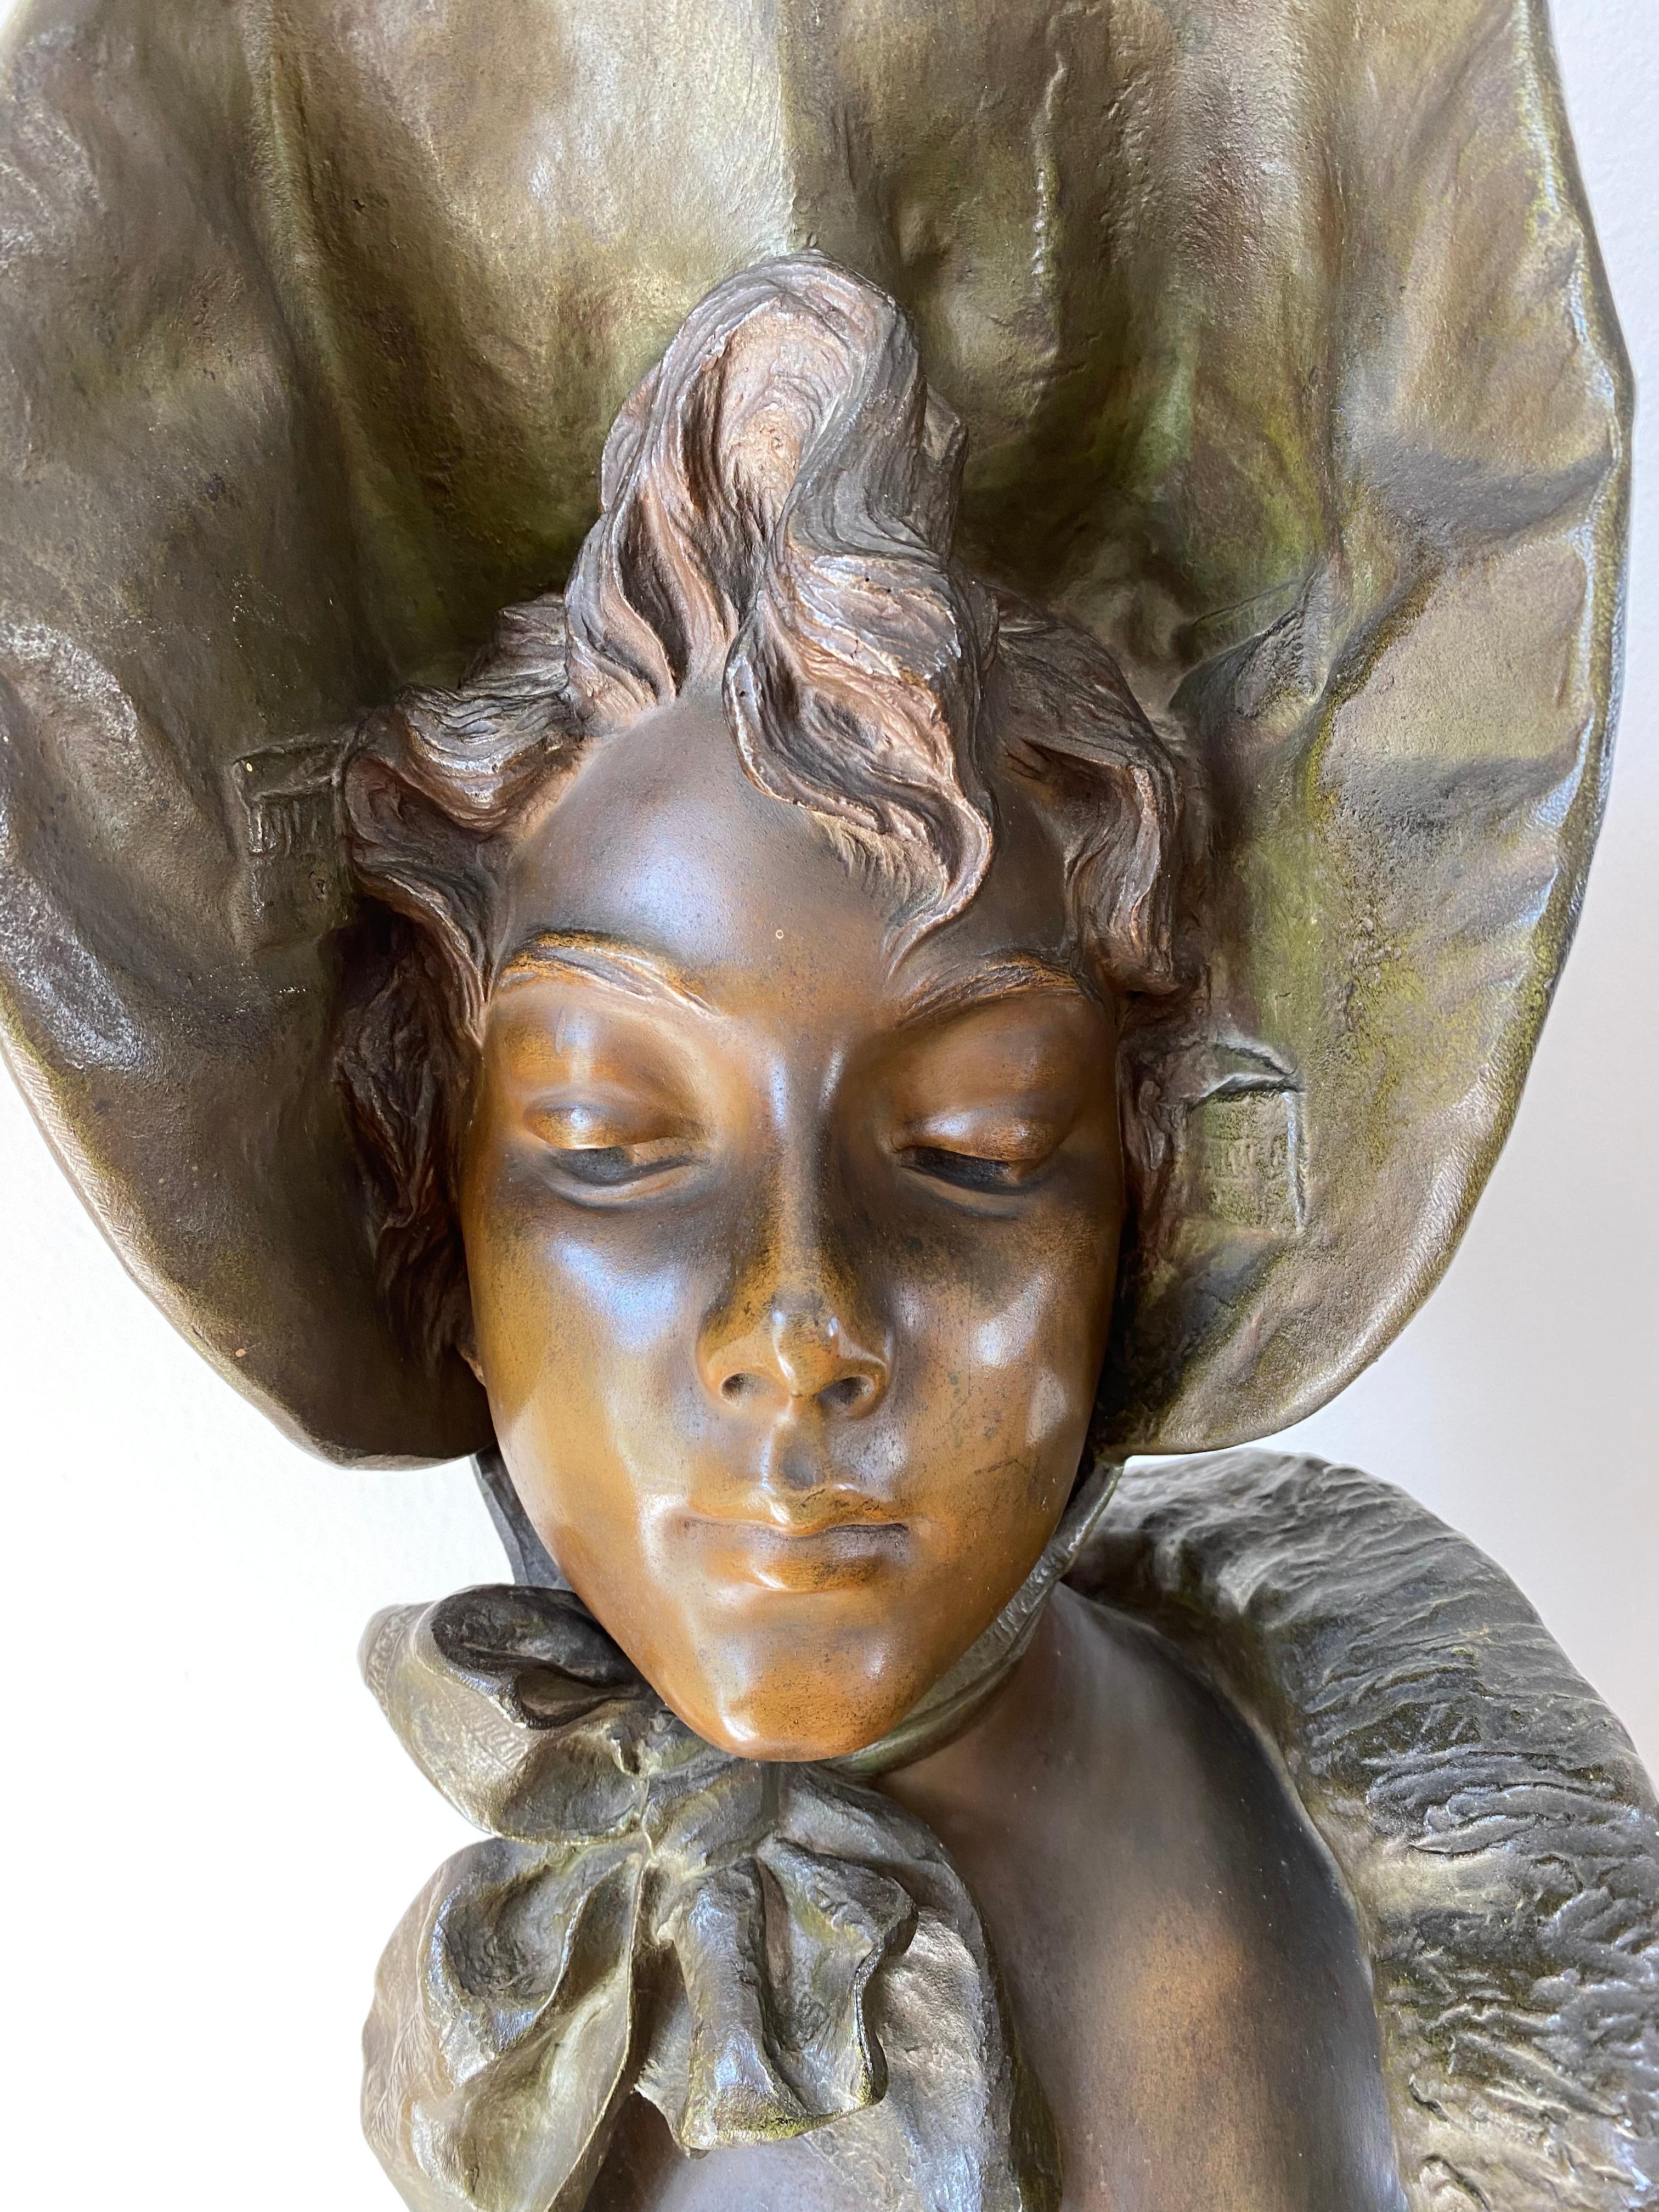 A late 19th-early 20th century French Art Nouveau bronze bust entitled “Mademoiselle Lange” of a beautiful young woman wearing a hat, modeled in the Art Nouveau style with excellent rich brown variegated patina and smooth tactile surface detail. Set